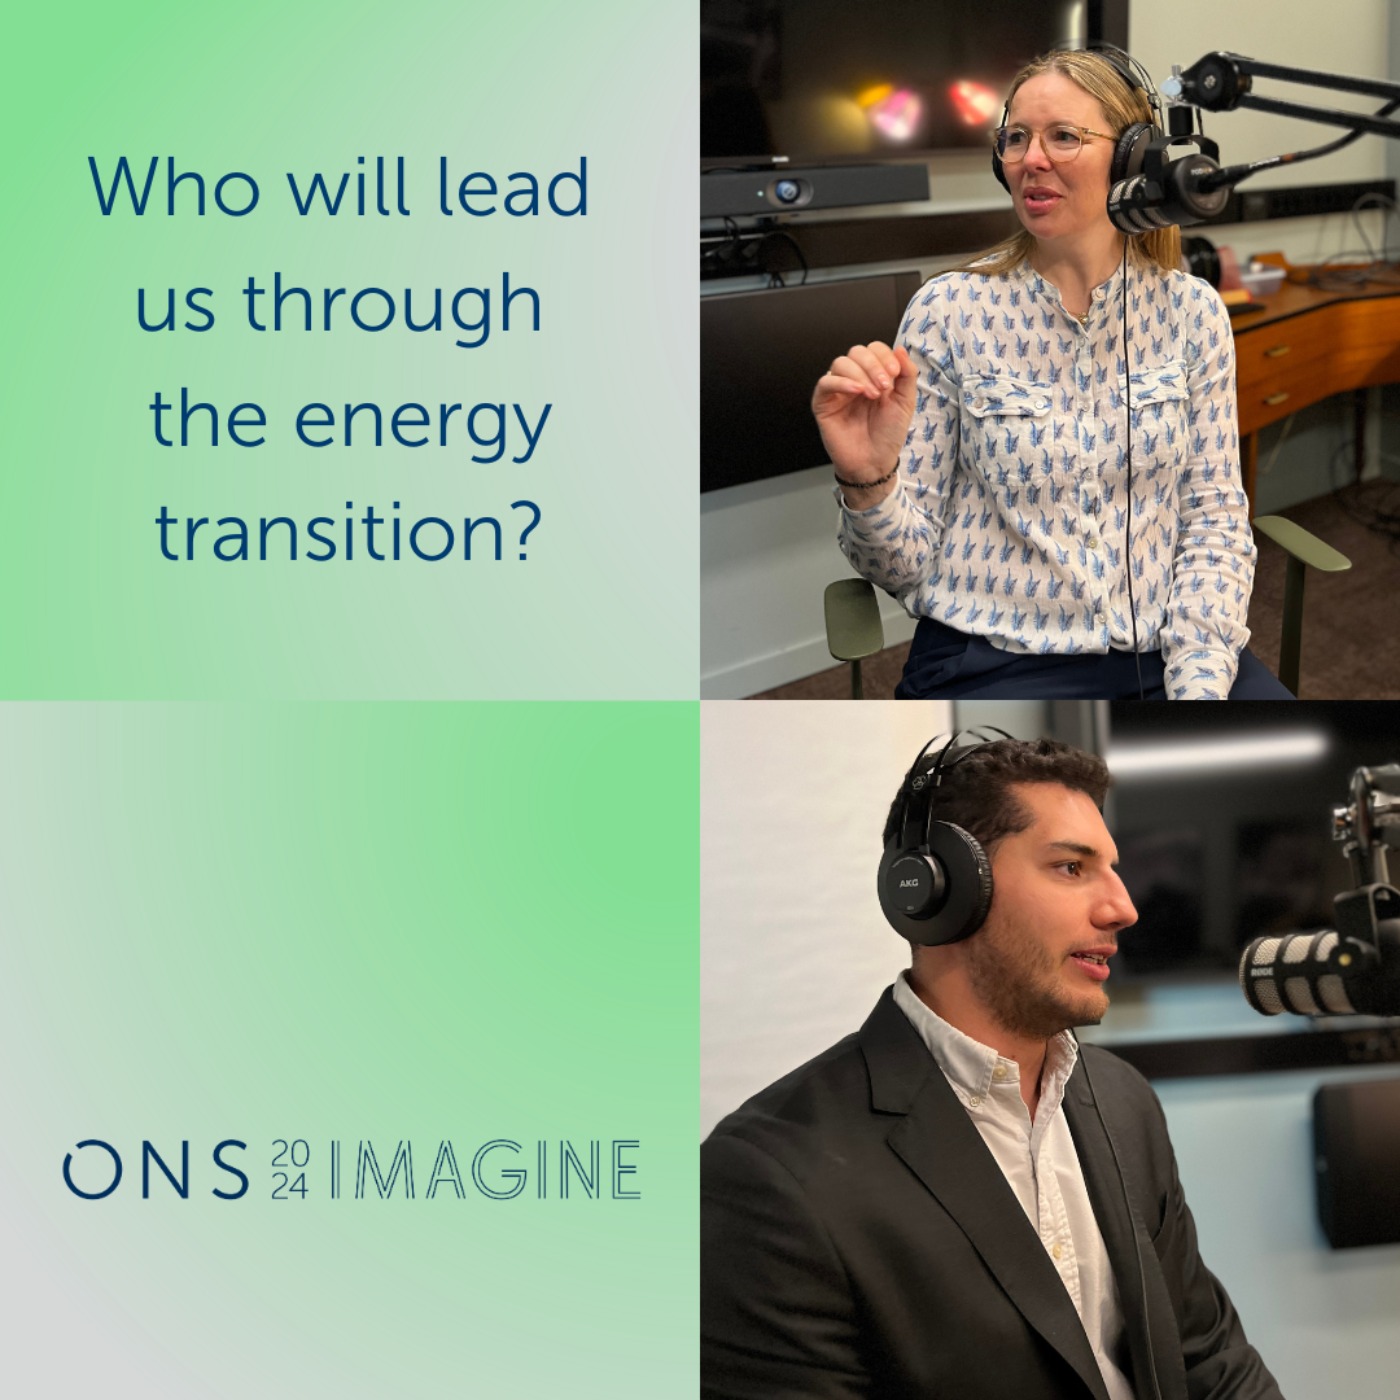 Who will lead us through the energy transition?